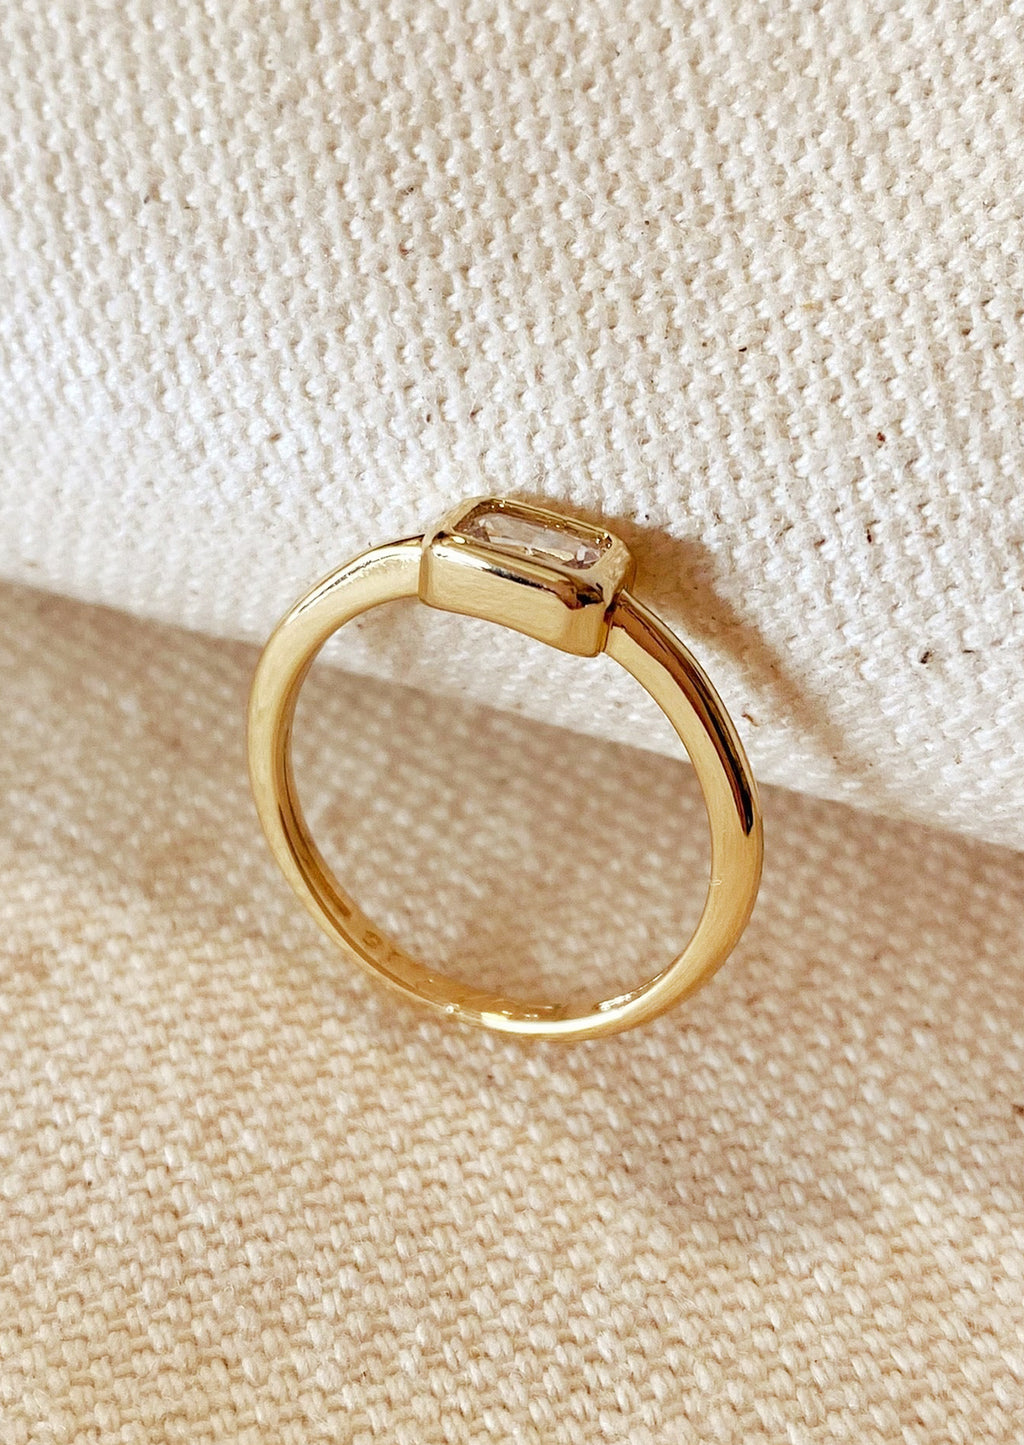 1: A gold ring with single rectangular clear stone.